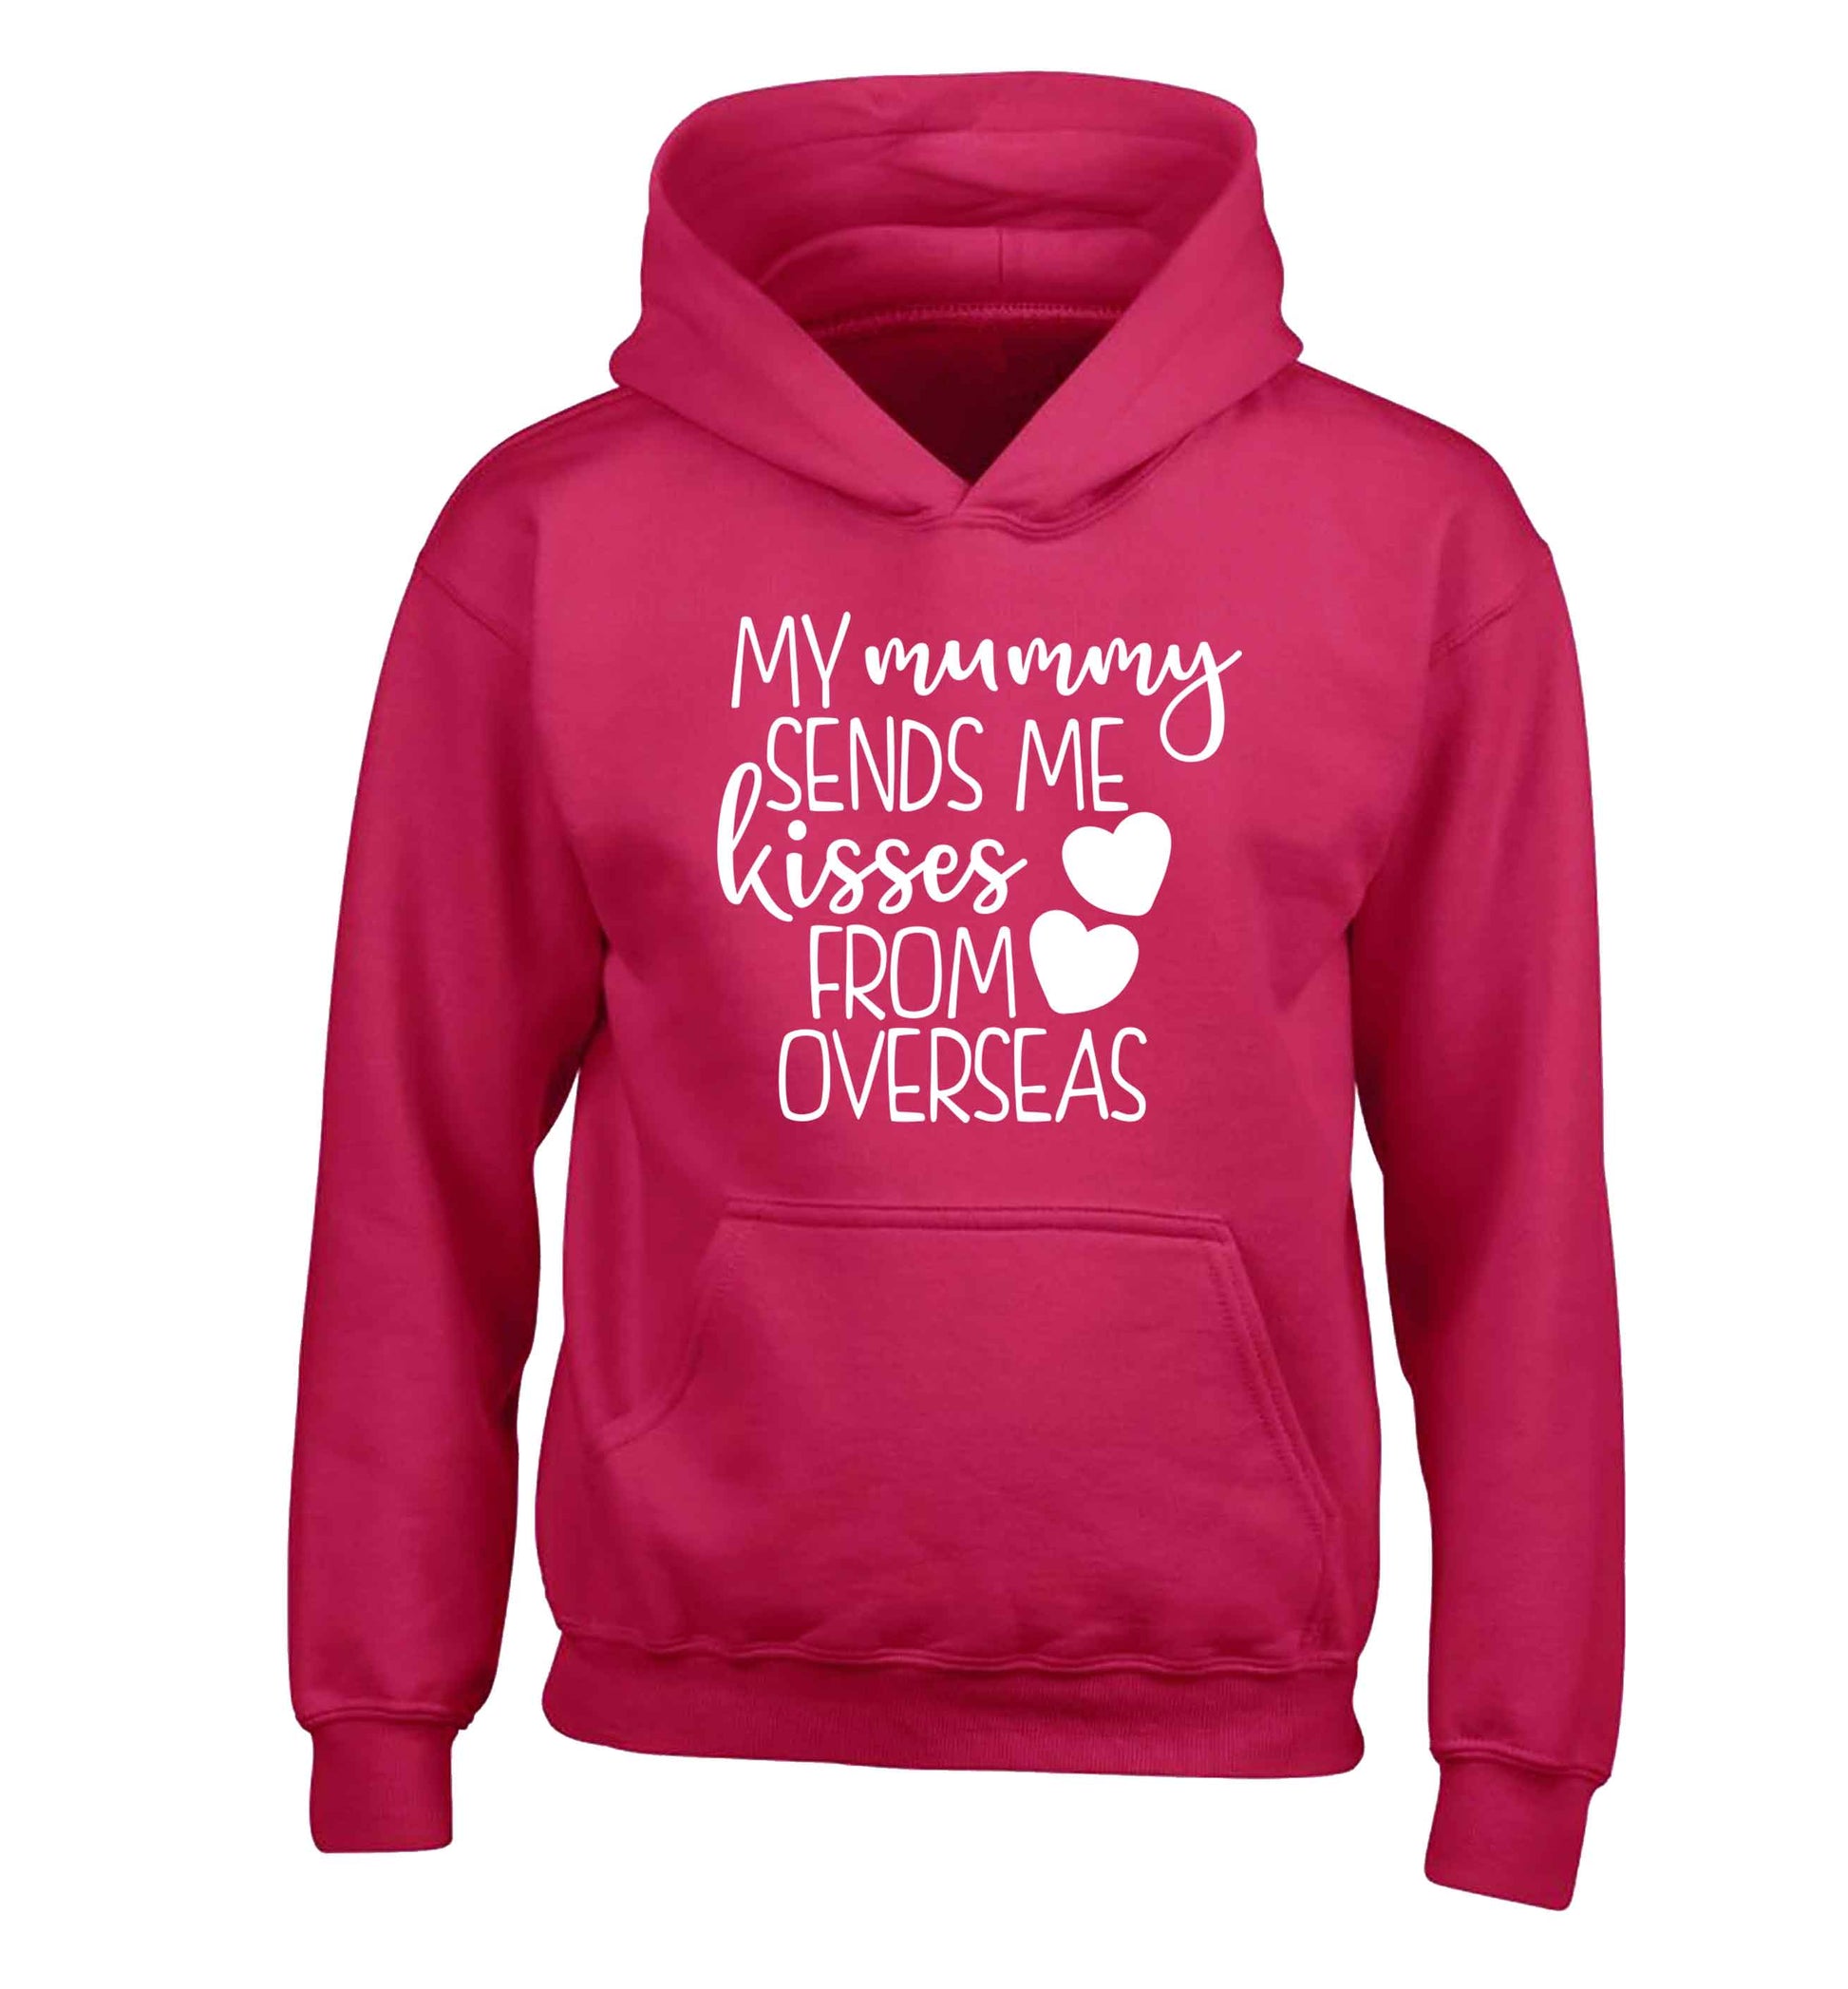 My mummy sends me kisses from overseas children's pink hoodie 12-13 Years